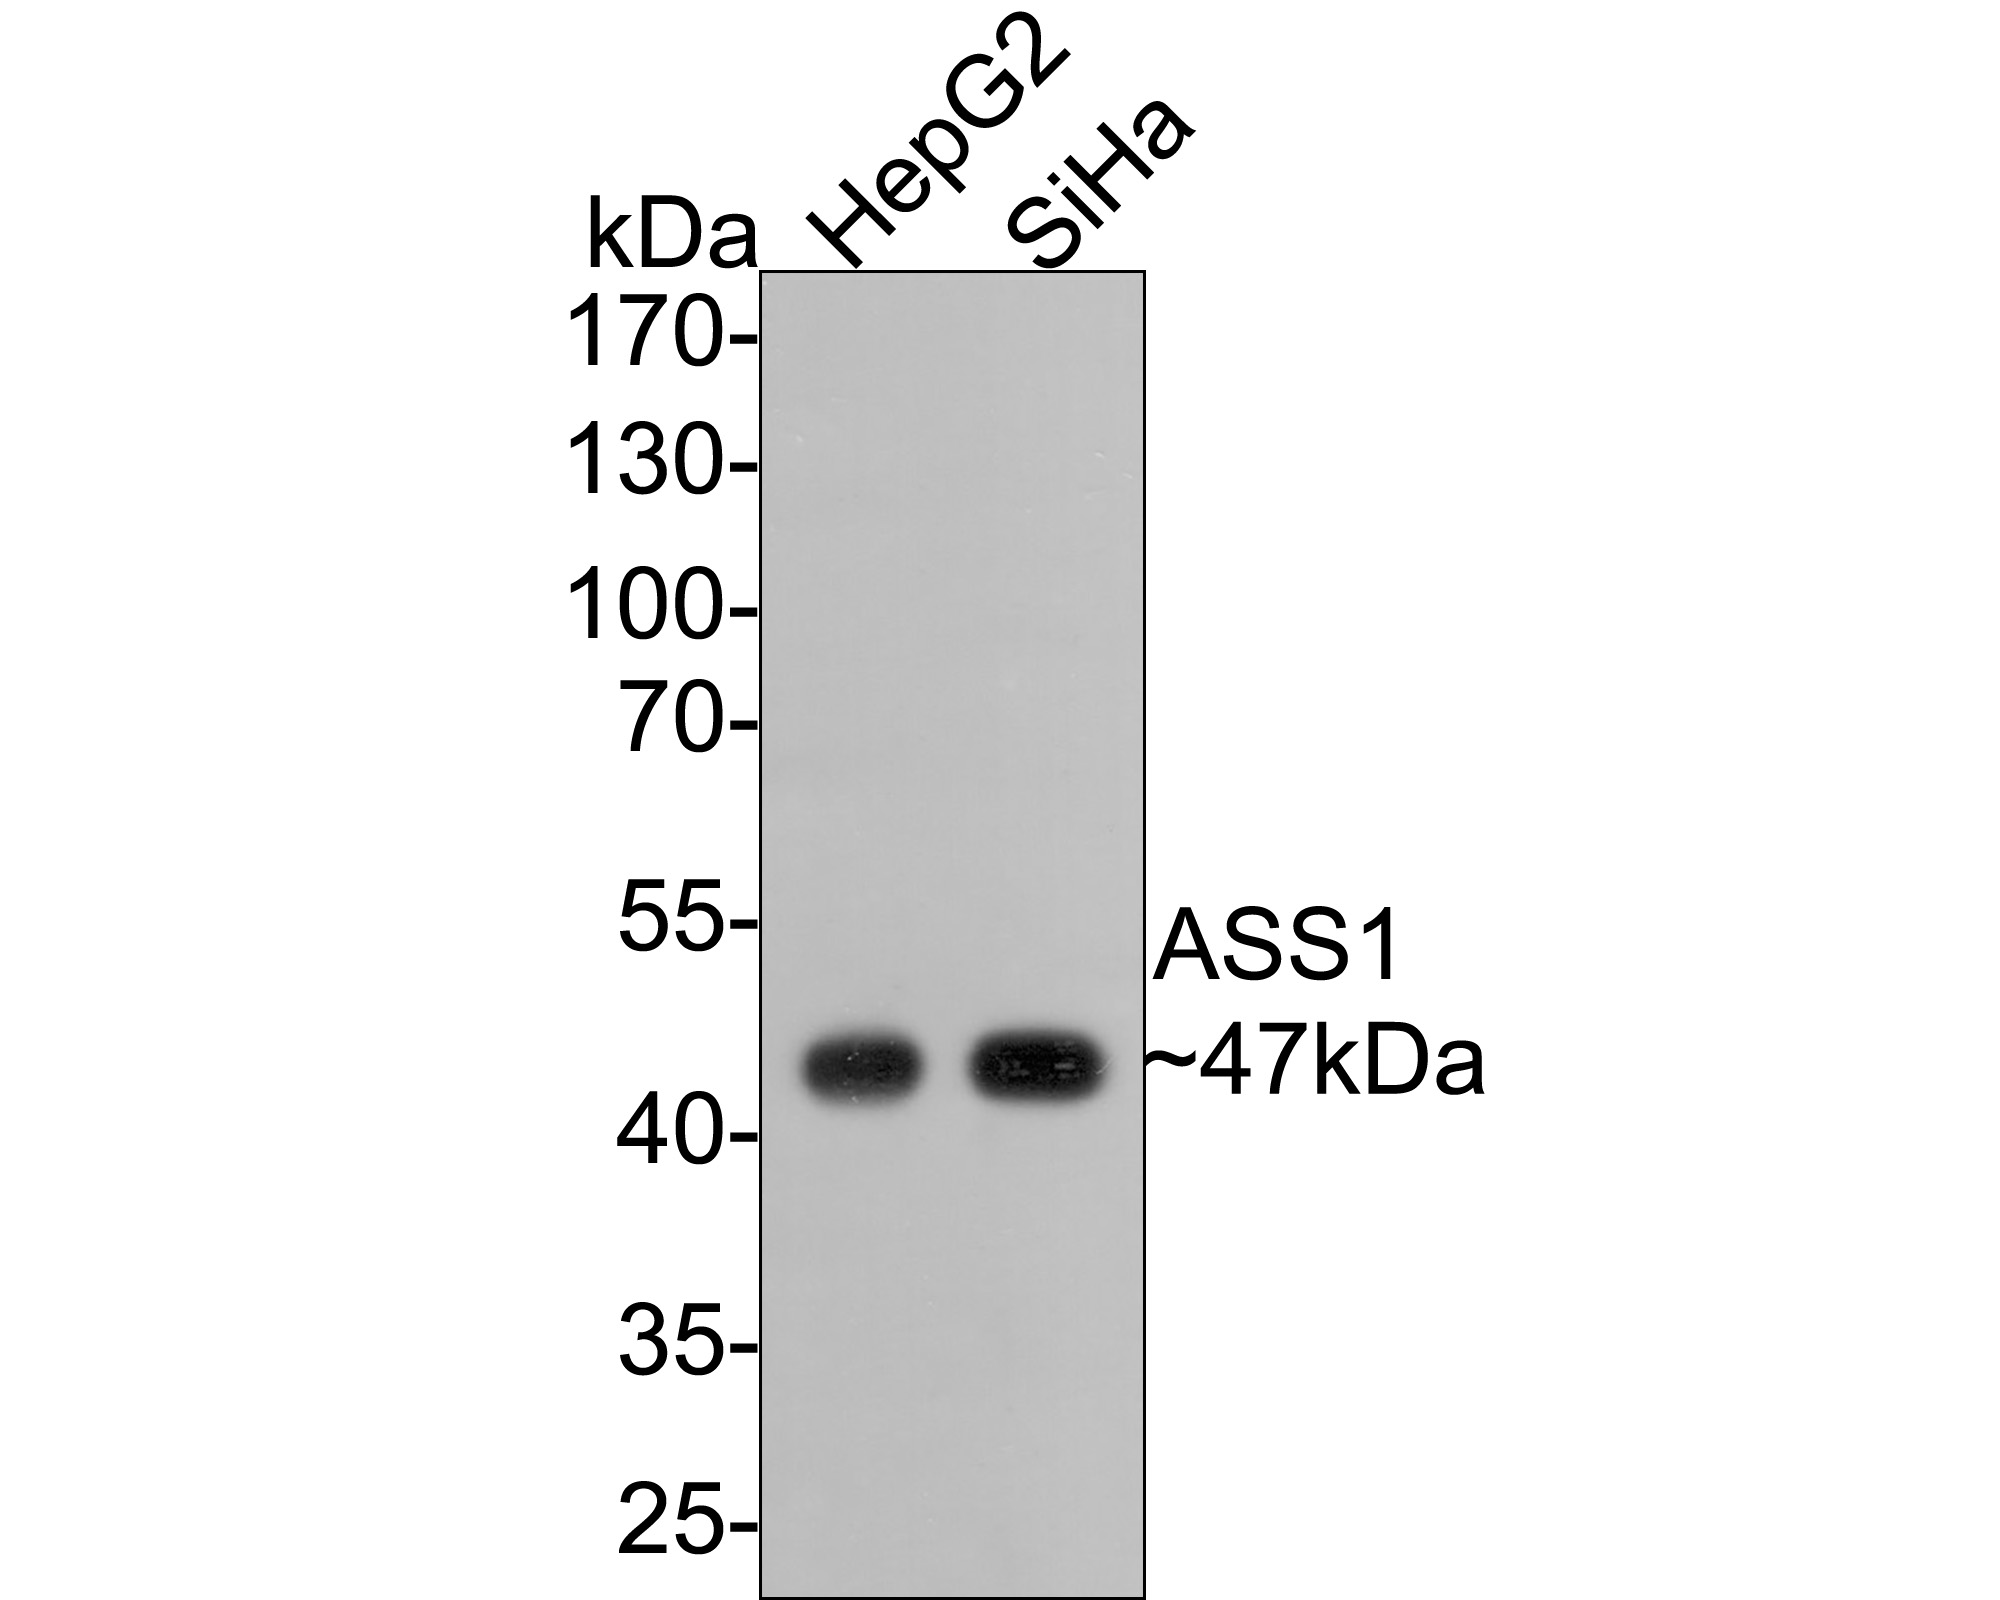 Western blot analysis of ASS1 on different lysates with Mouse anti-ASS1 antibody (EM1701-87) at 1/5,000 dilution.<br />
<br />
Lane 1: HepG2 cell lysate<br />
Lane 2: SiHa cell lysate<br />
<br />
Lysates/proteins at 10 µg/Lane.<br />
<br />
Predicted band size: 47 kDa<br />
Observed band size: 47 kDa<br />
<br />
Exposure time: 30 seconds;<br />
<br />
10% SDS-PAGE gel.<br />
<br />
Proteins were transferred to a PVDF membrane and blocked with 5% NFDM/TBST for 1 hour at room temperature. The primary antibody (EM1701-87) at 1/5,000 dilution was used in 5% NFDM/TBST at room temperature for 2 hours. Goat Anti-Mouse IgG - HRP Secondary Antibody (HA1006) at 1:100,000 dilution was used for 1 hour at room temperature.